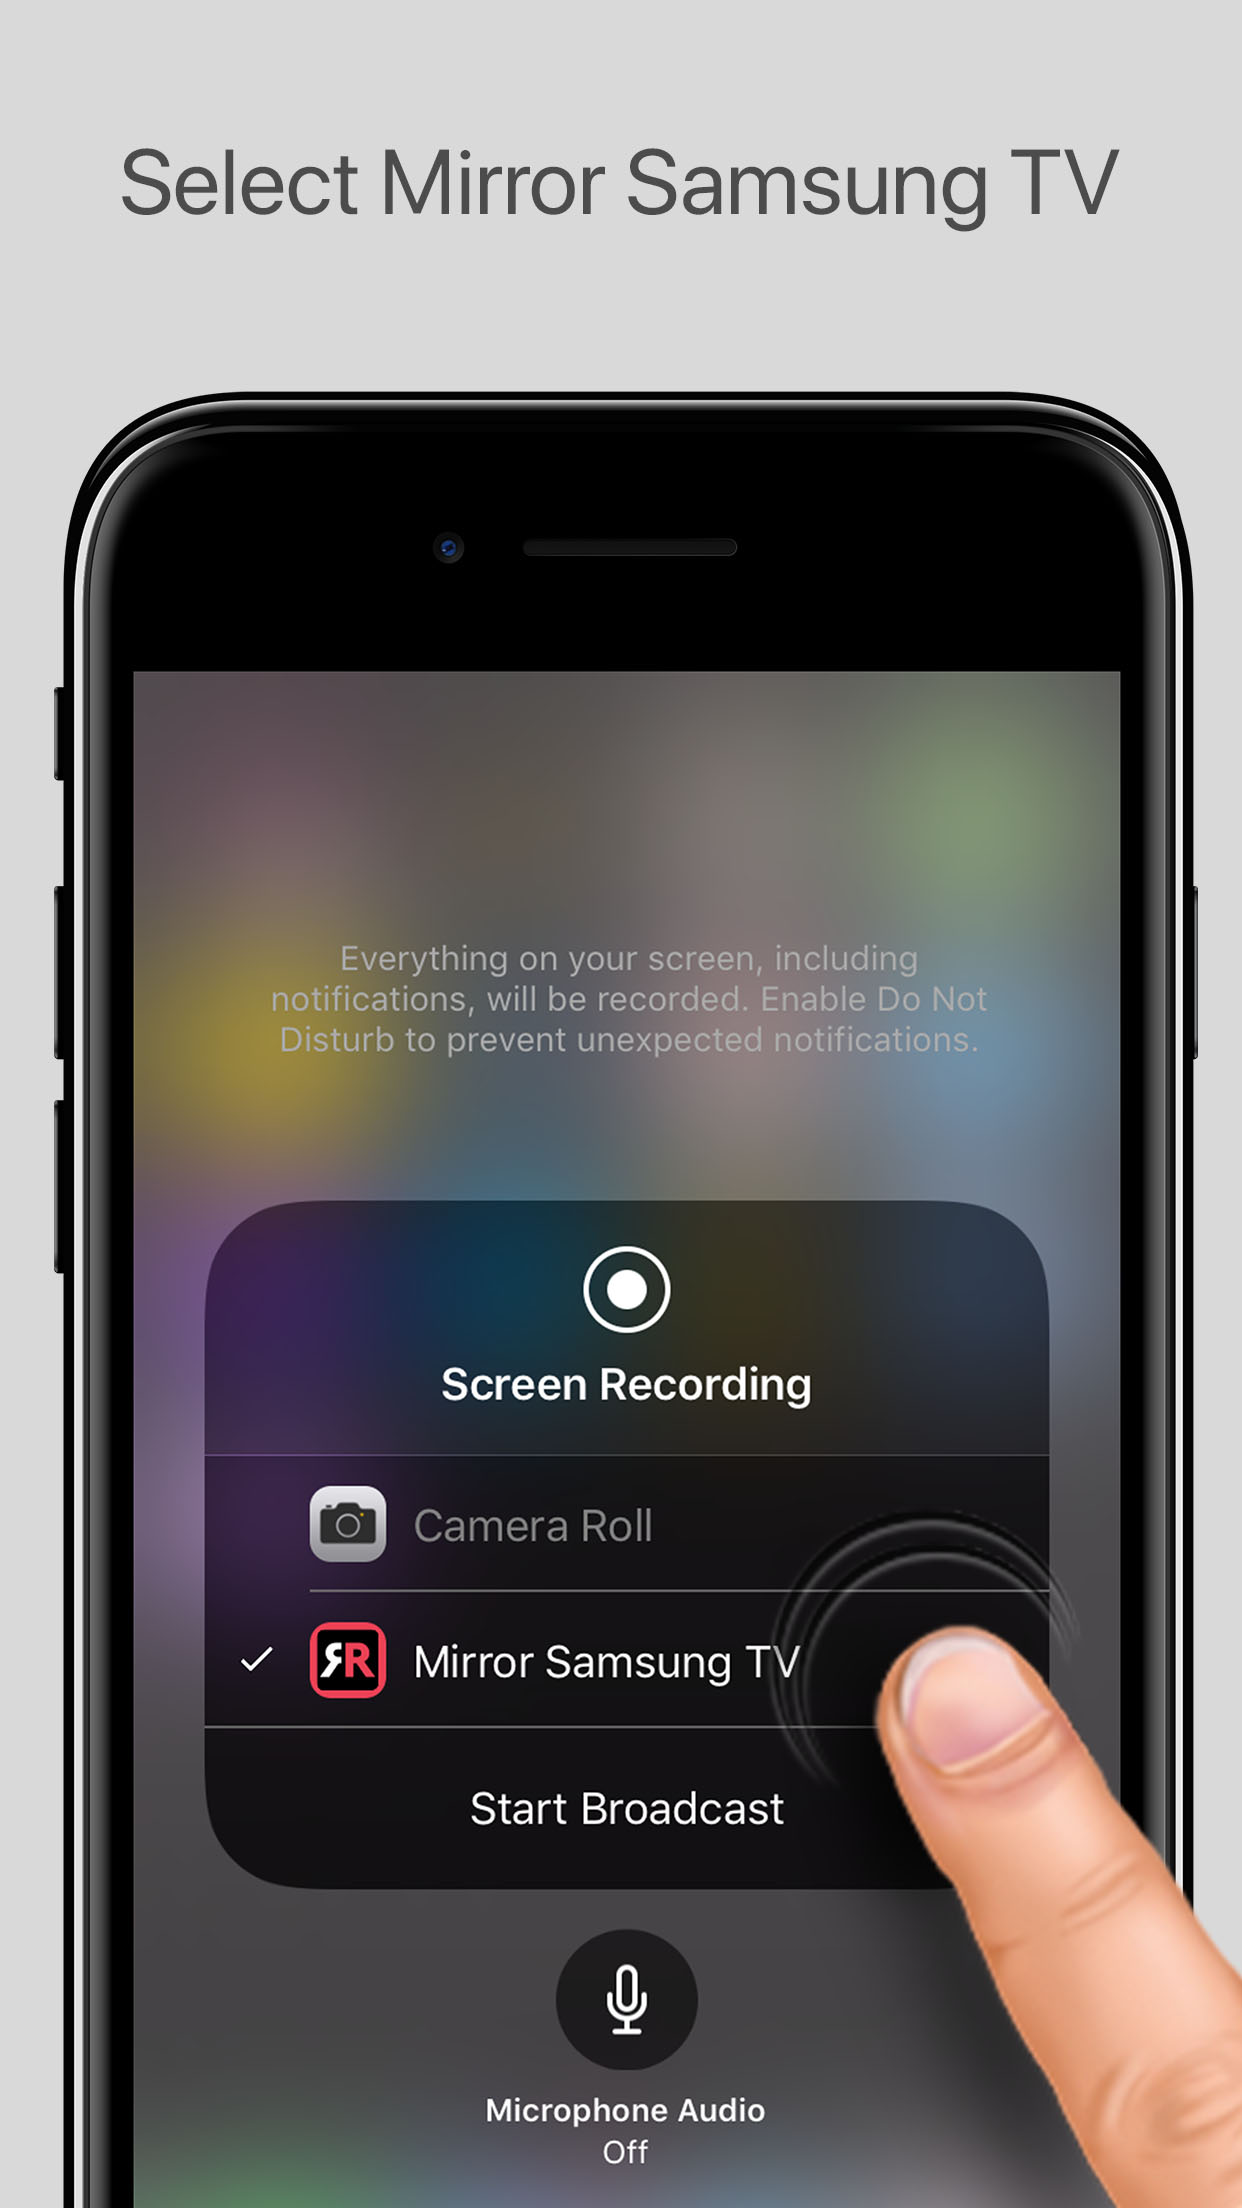 Mirror Your Iphone Or Ipad On A Smart Tv, Can You Do Screen Mirroring On Iphone To Samsung Tv